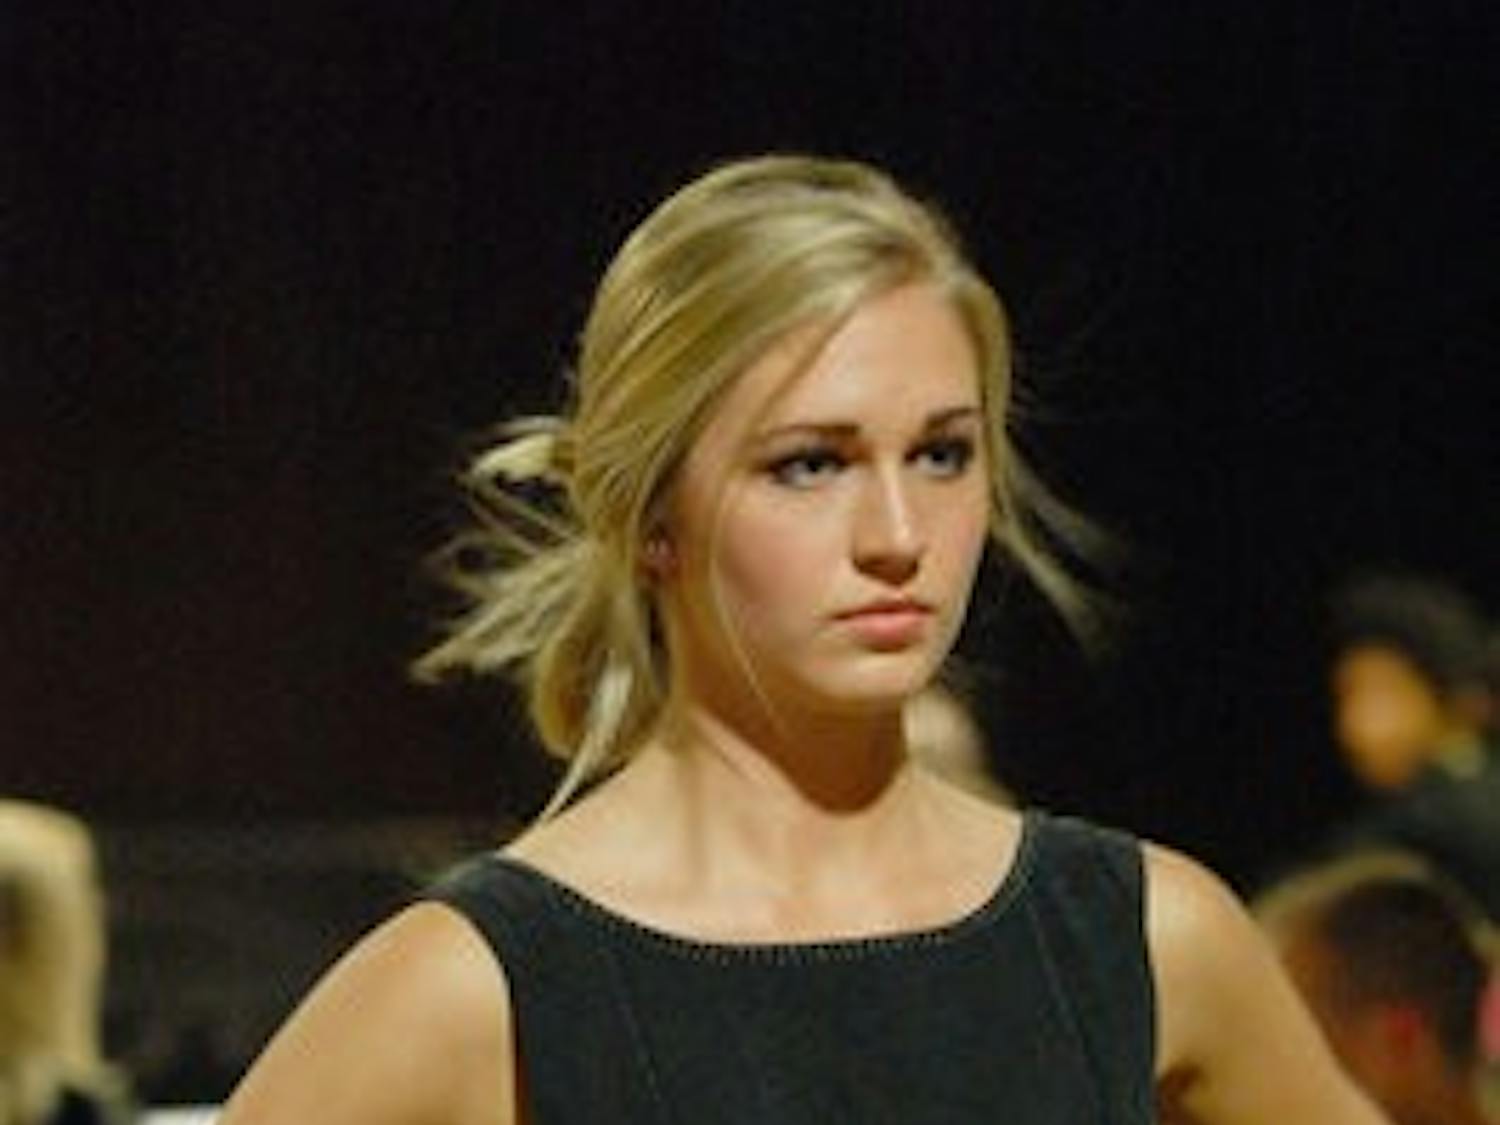 Gilda Osborn, sophomore in prenursing, walks the runway during the Couture for the Cure fashion show Thursday. (Charlie Timberlake / ASSISTANT PHOTO EDITOR)